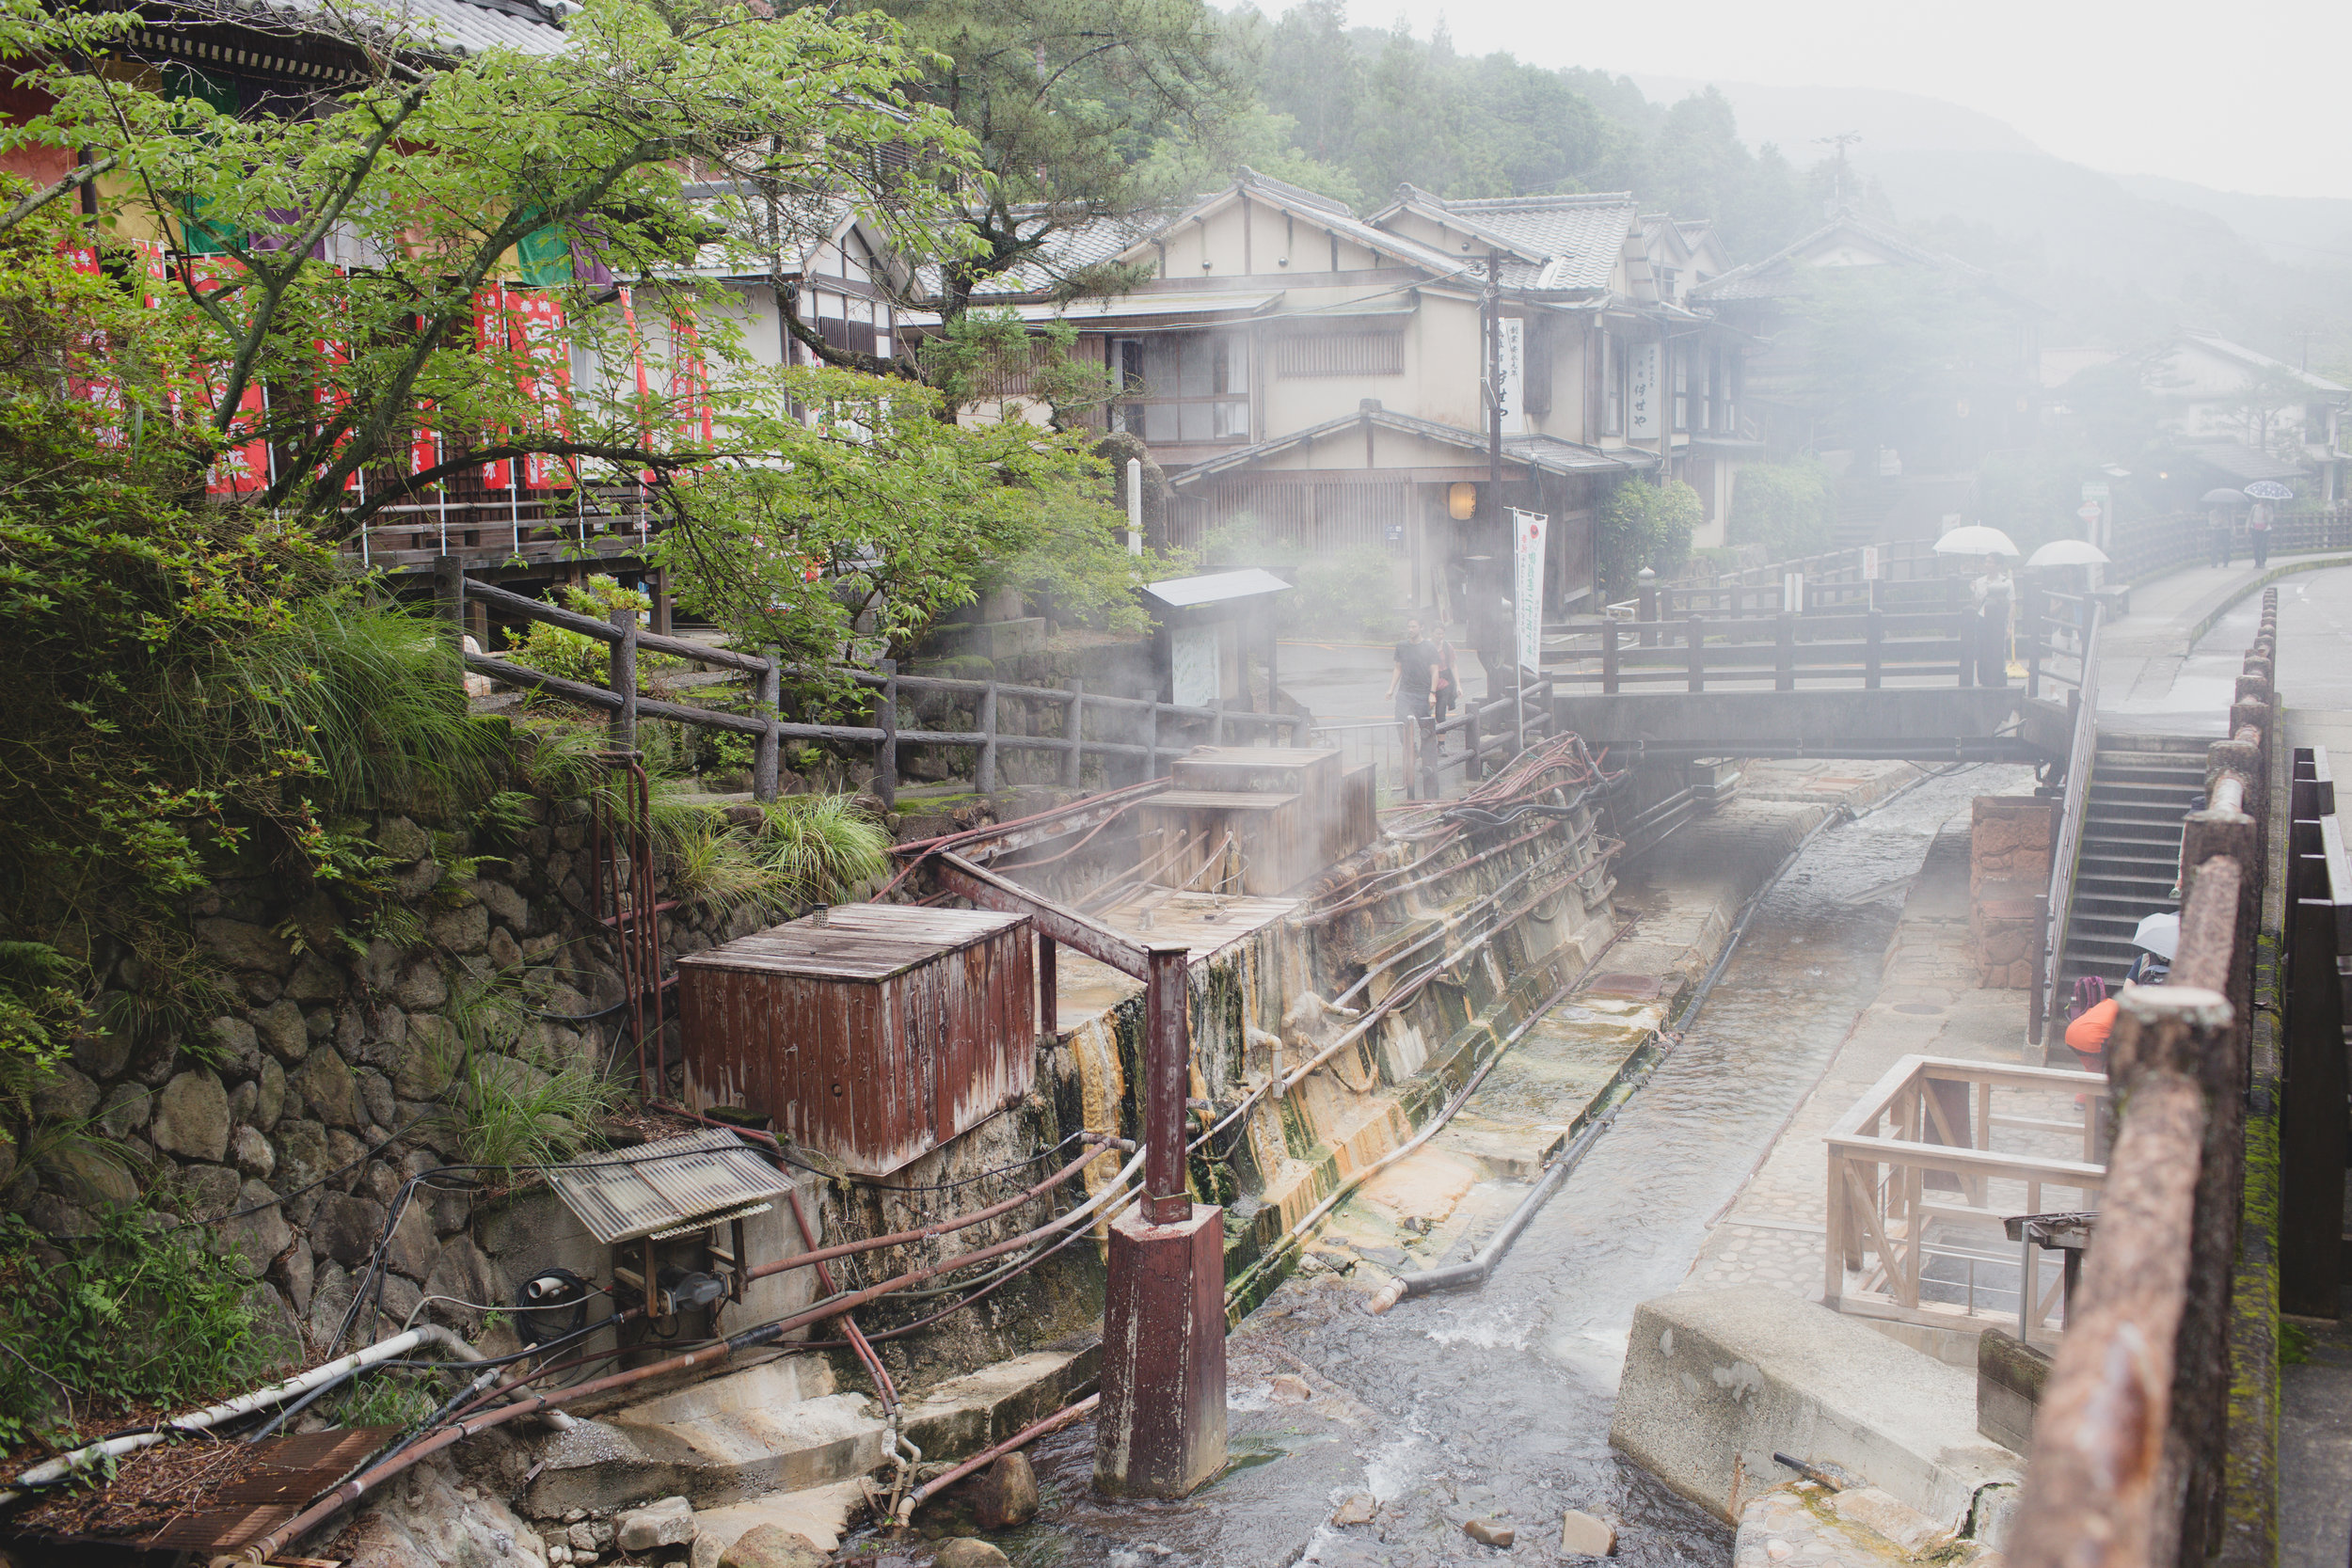  After another full day of hiking we arrived at Yunomine Onsen which has the world’s only UNESCO world heritage hot spring 